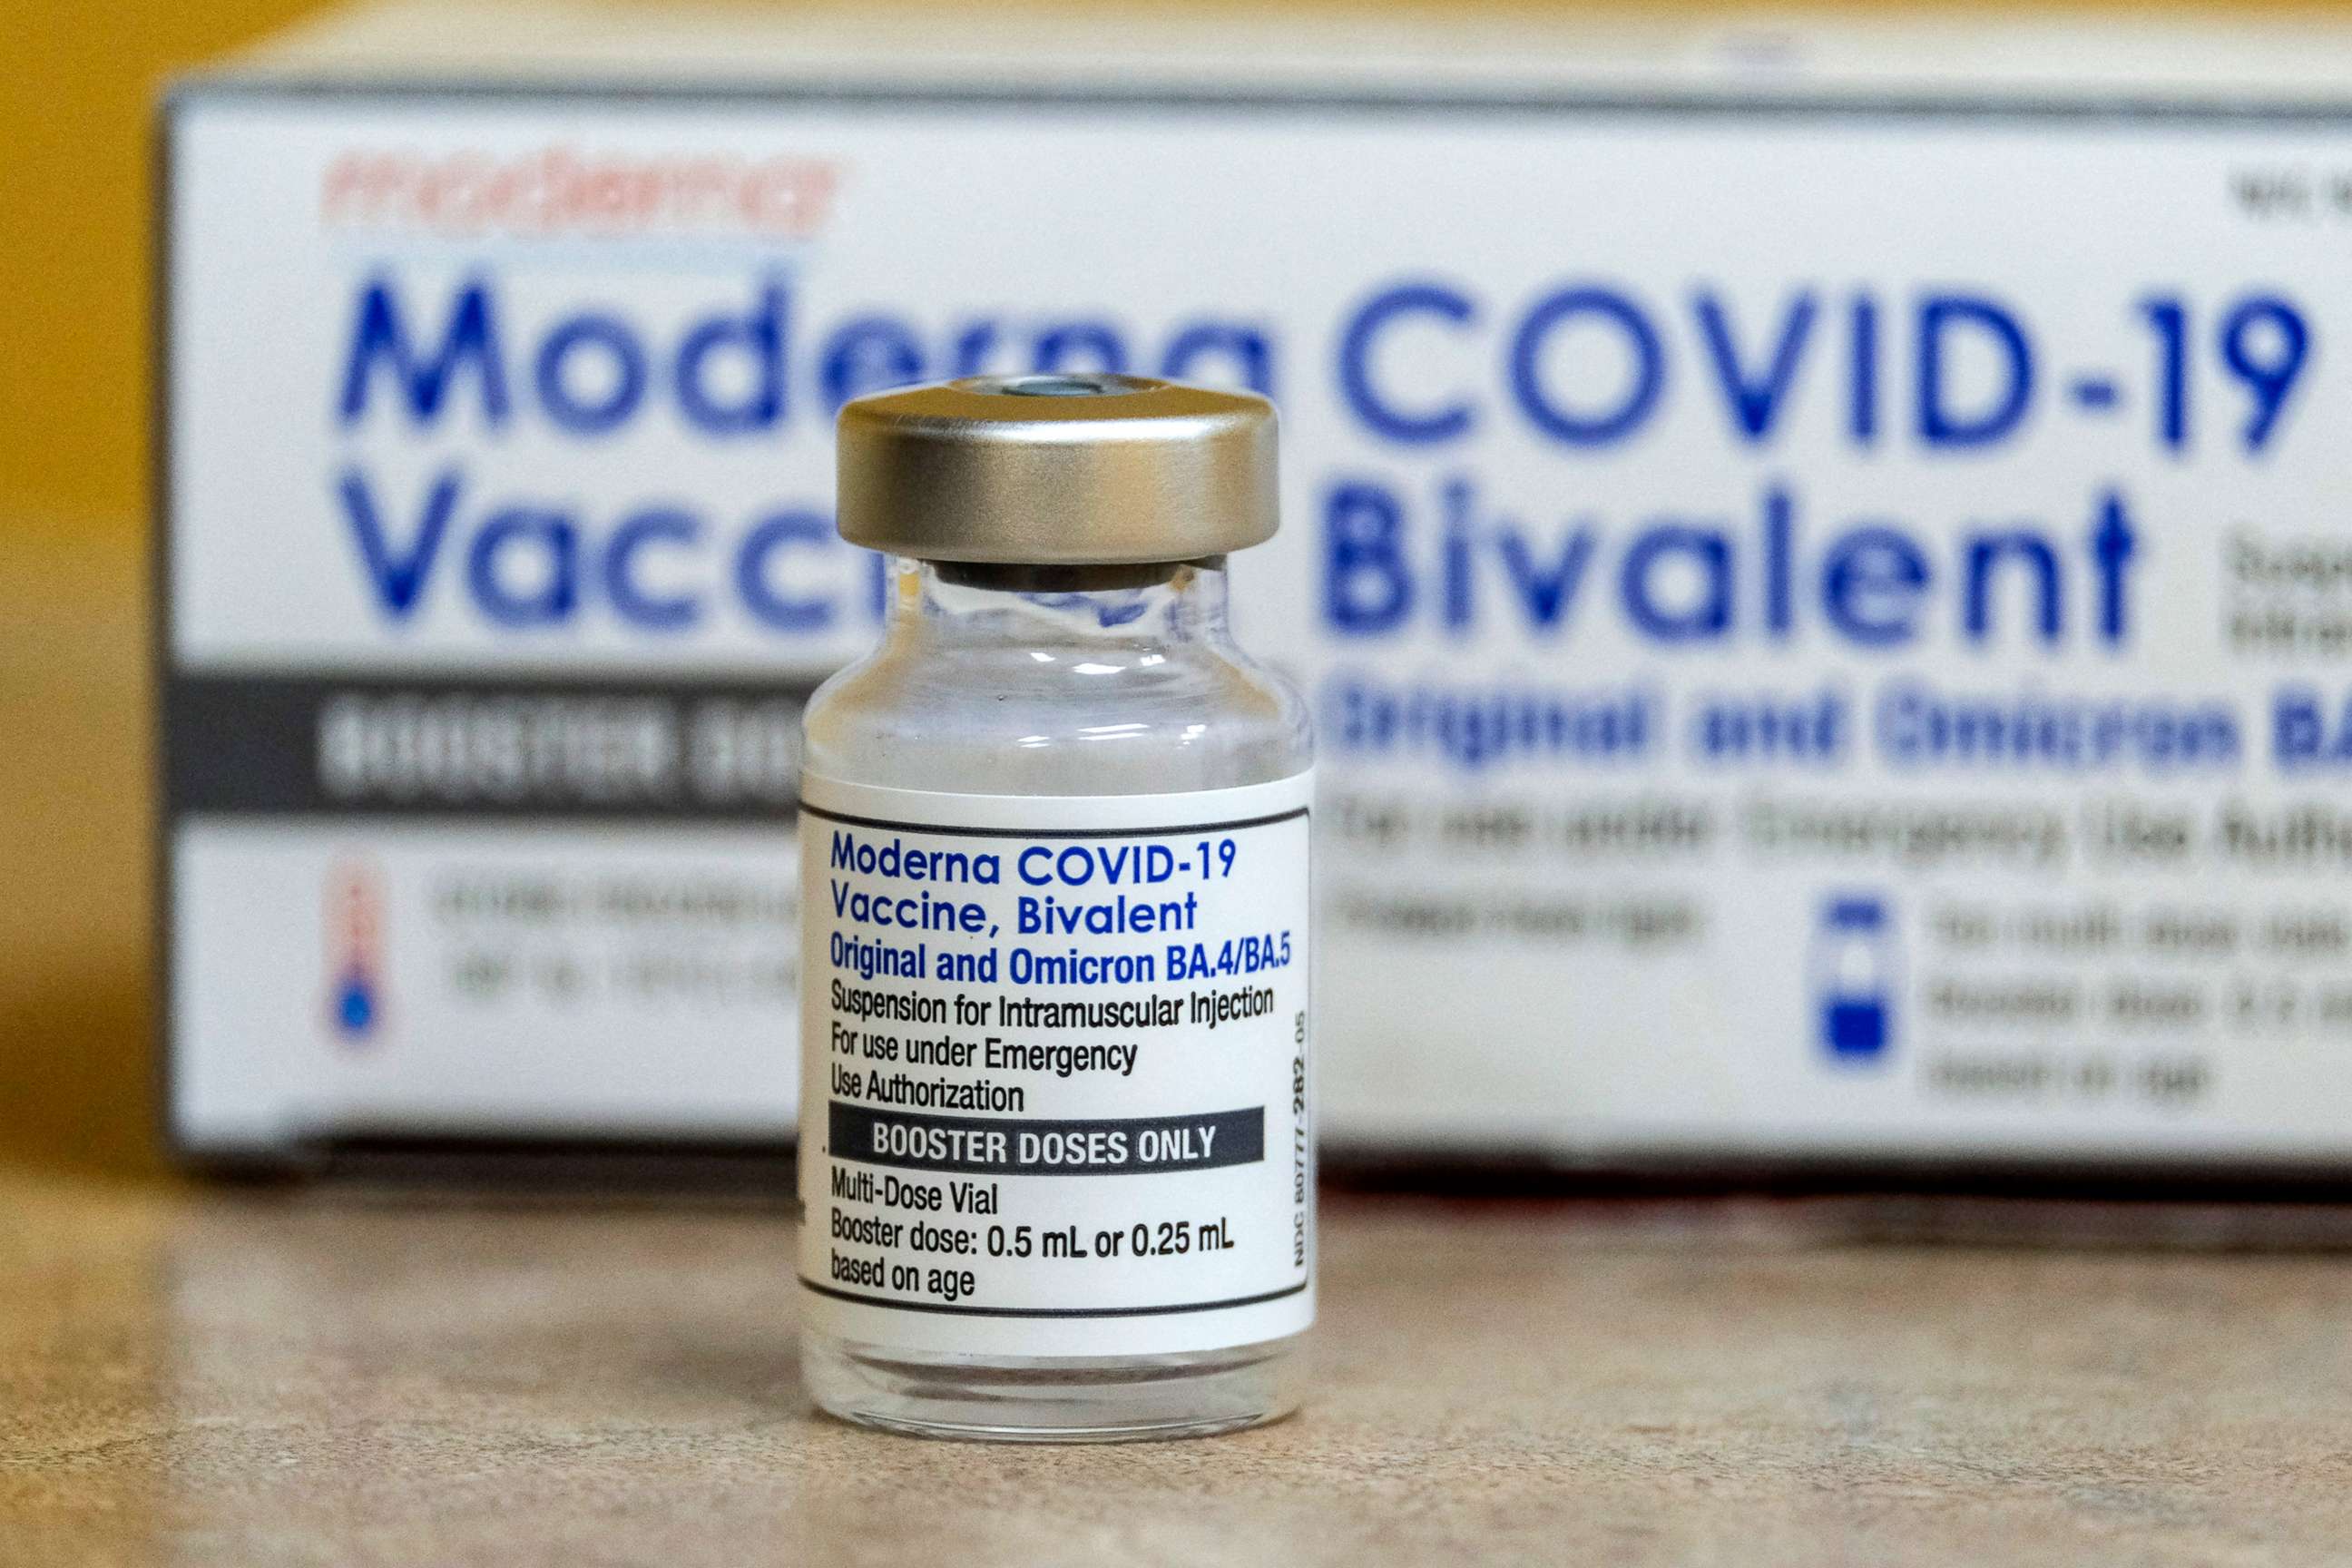 PHOTO: In this Oct. 6, 2022, file photo, a vial of the Moderna Covid-19 vaccine, Bivalent, is shown at AltaMed Medical clinic in Los Angeles.